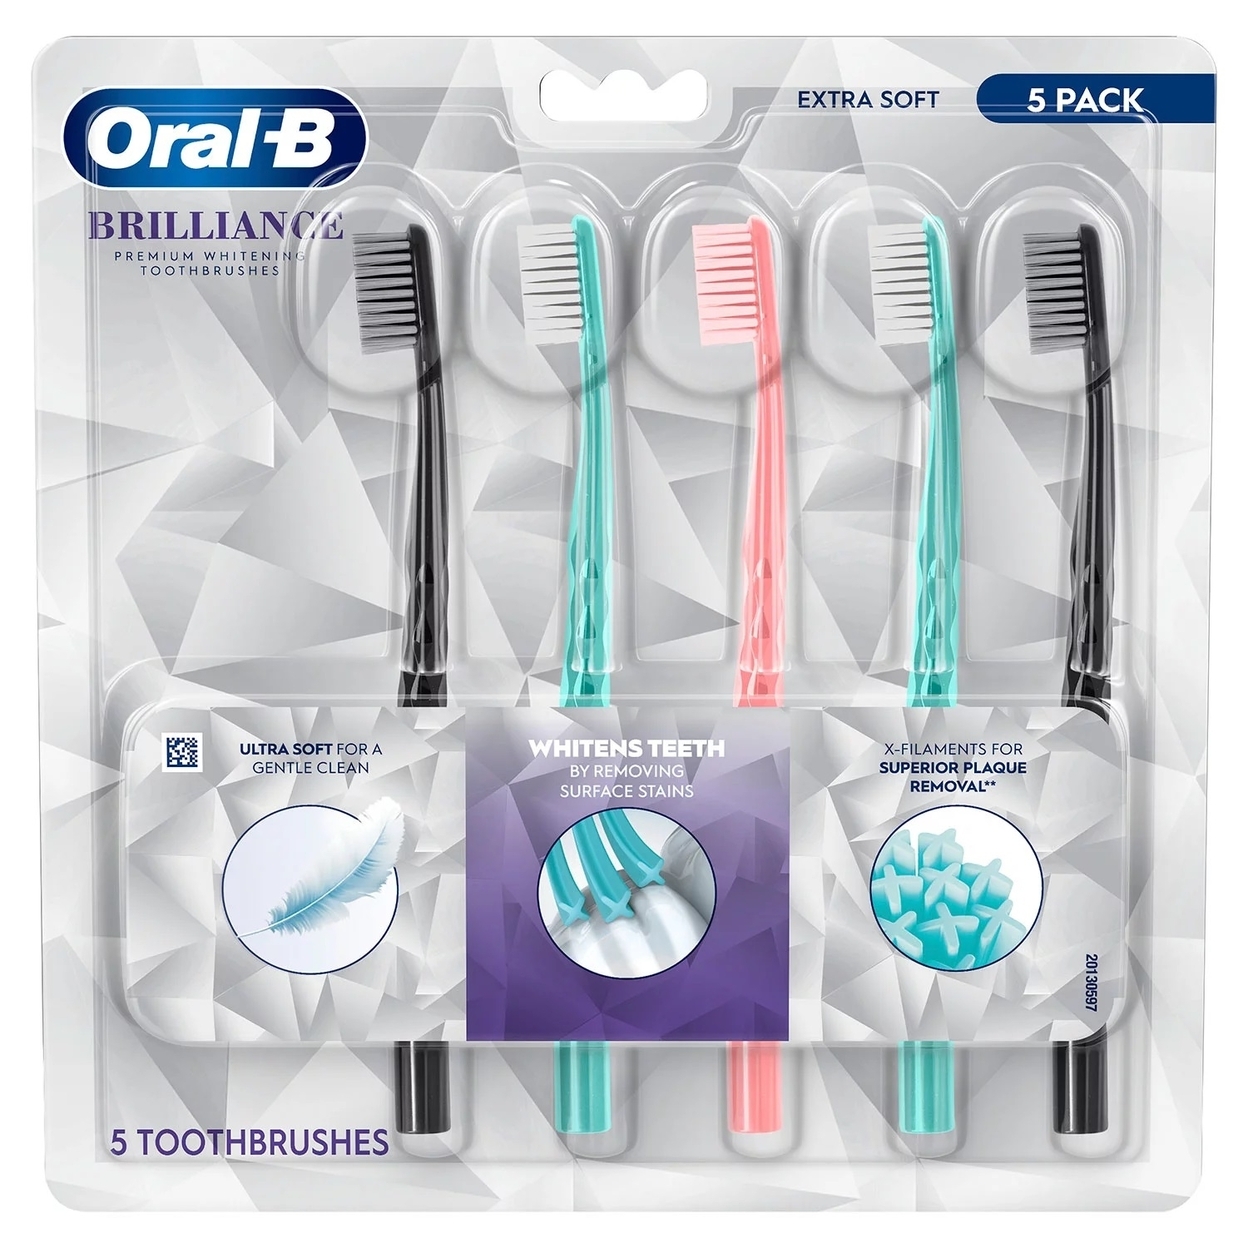 Oral-B Brilliance Whitening Toothbrush With X Filaments, Extra Soft (5 Count)